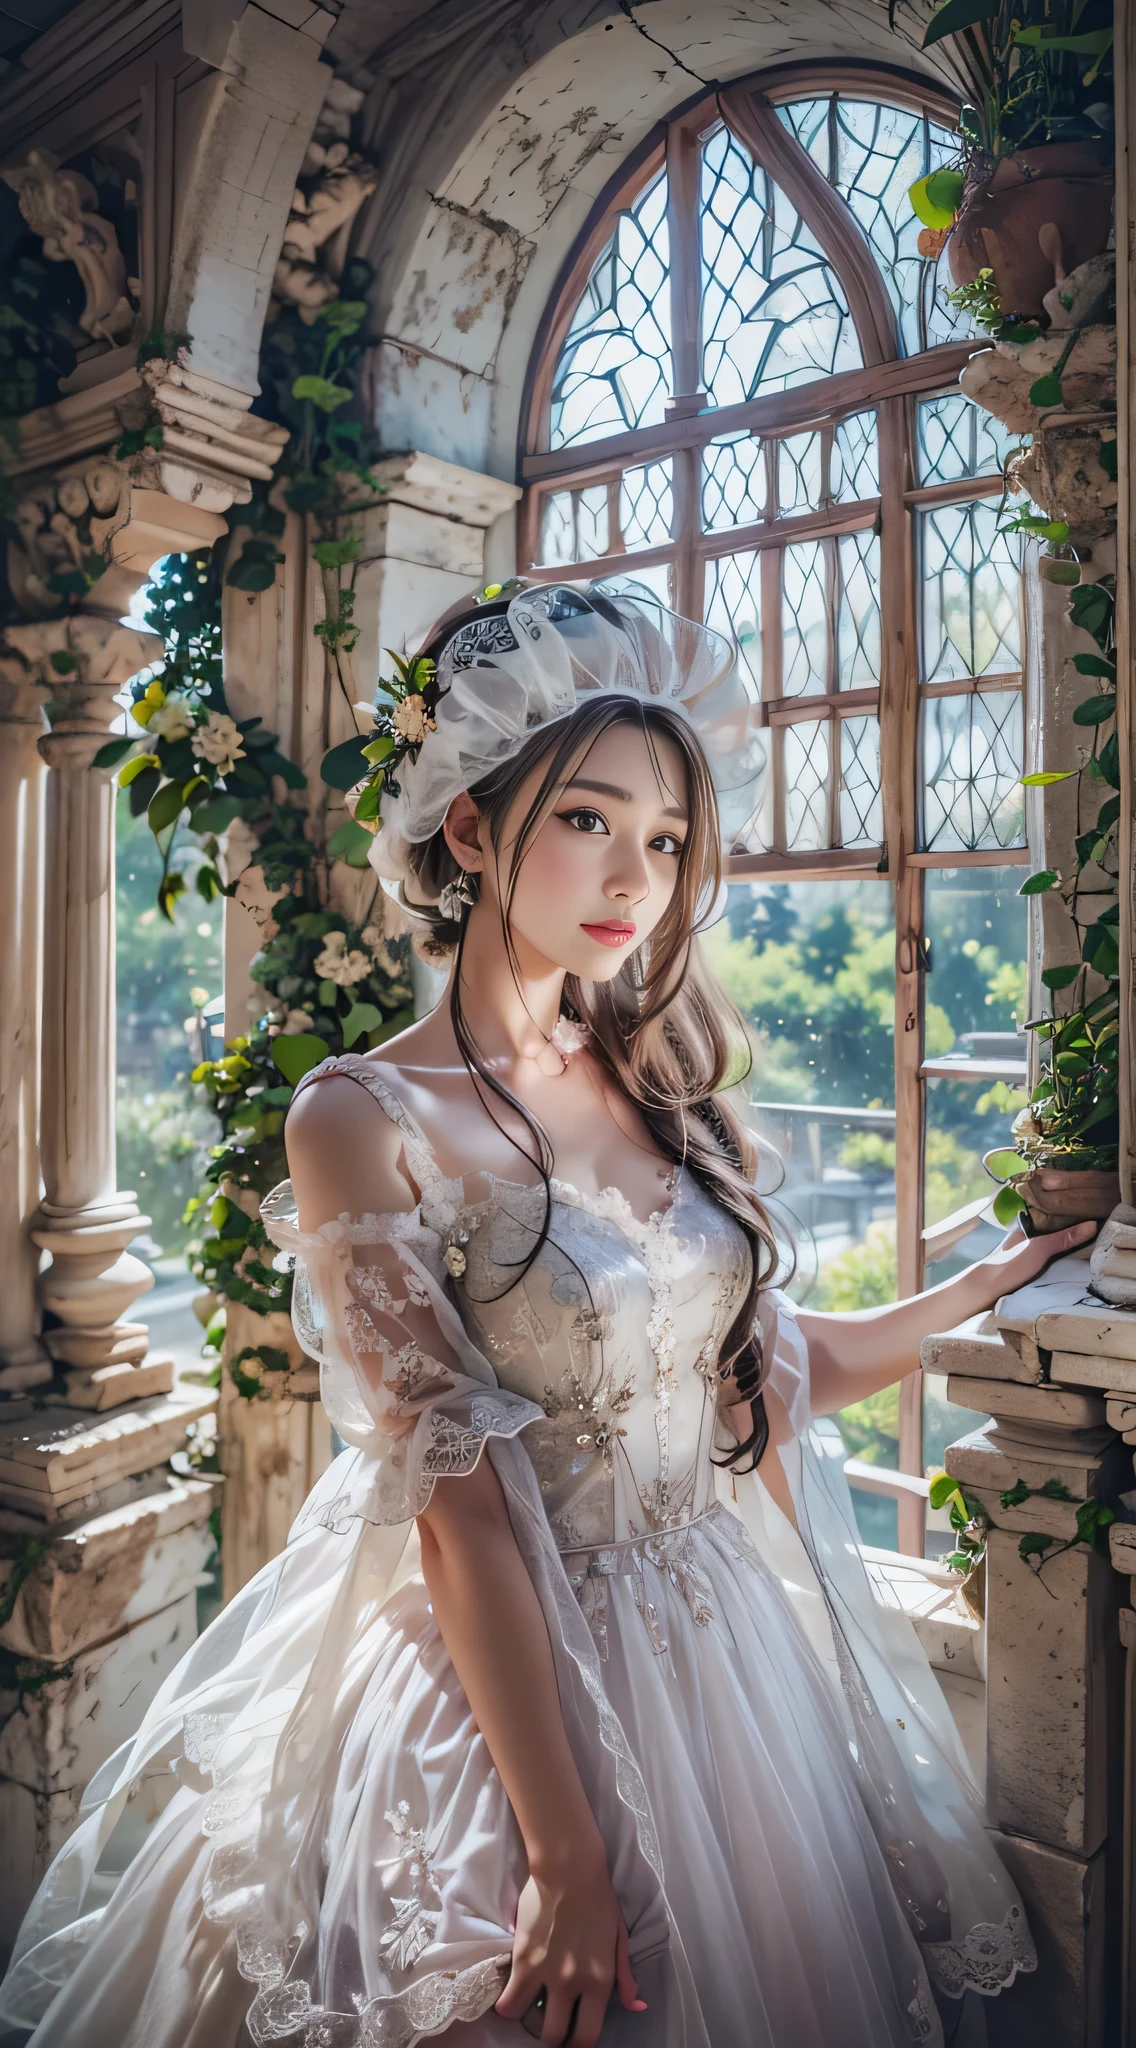 （8K， RAW photos， best qualtiy， tmasterpiece：1.2），（realisticlying， photograph realistic：1.4)
Lolita costume，Lace， Aerith Gainsborough， The upper part of the body， undergarments，exposed bare shoulders， do lado de fora， Old castle， high high quality， Adobe Lightroom， highdetailskin， looking at viewert，